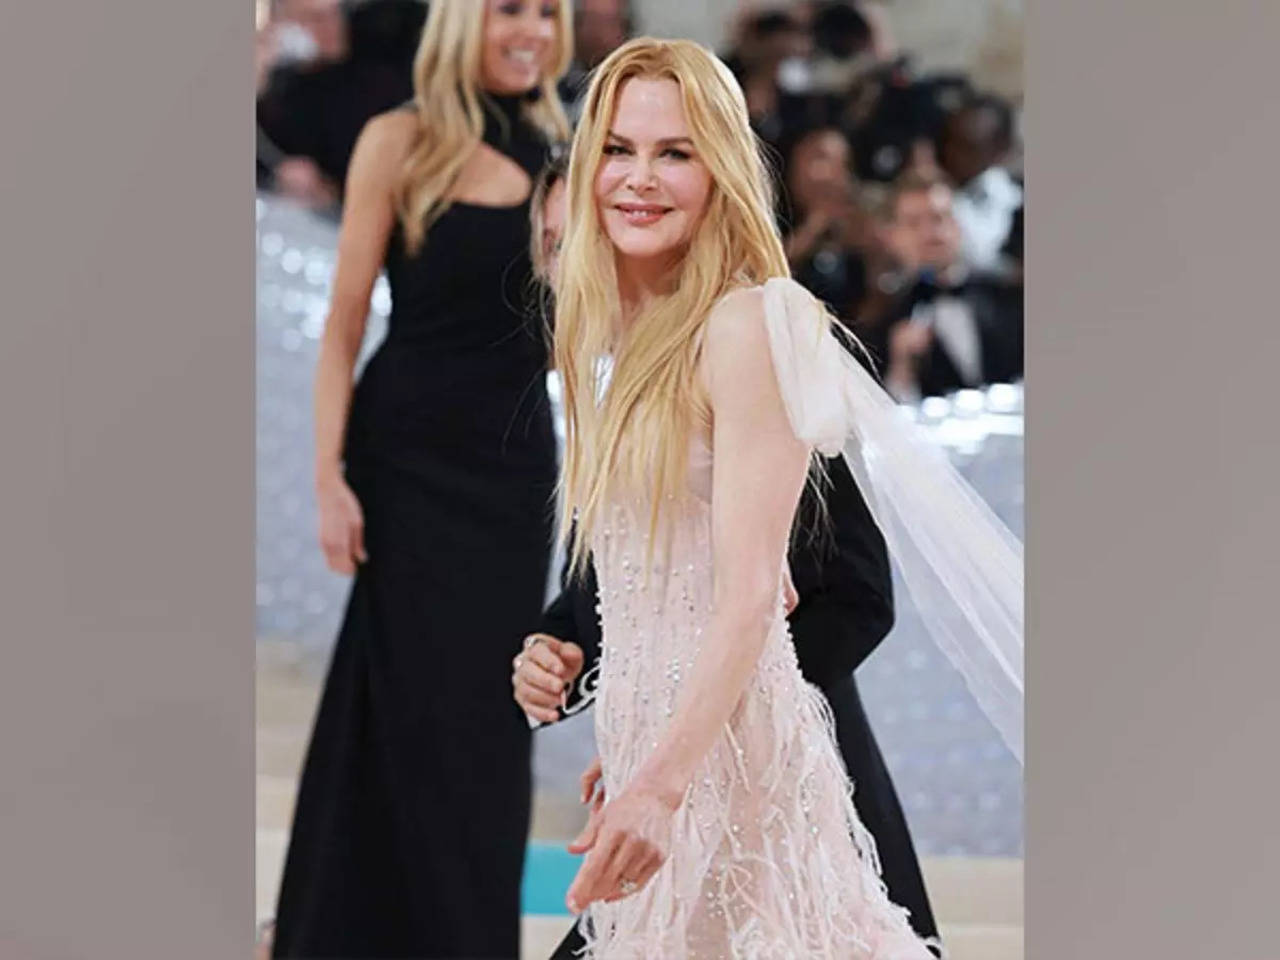 Nicole Kidman's Met Gala look is from her iconic Chanel Nº5 commercial